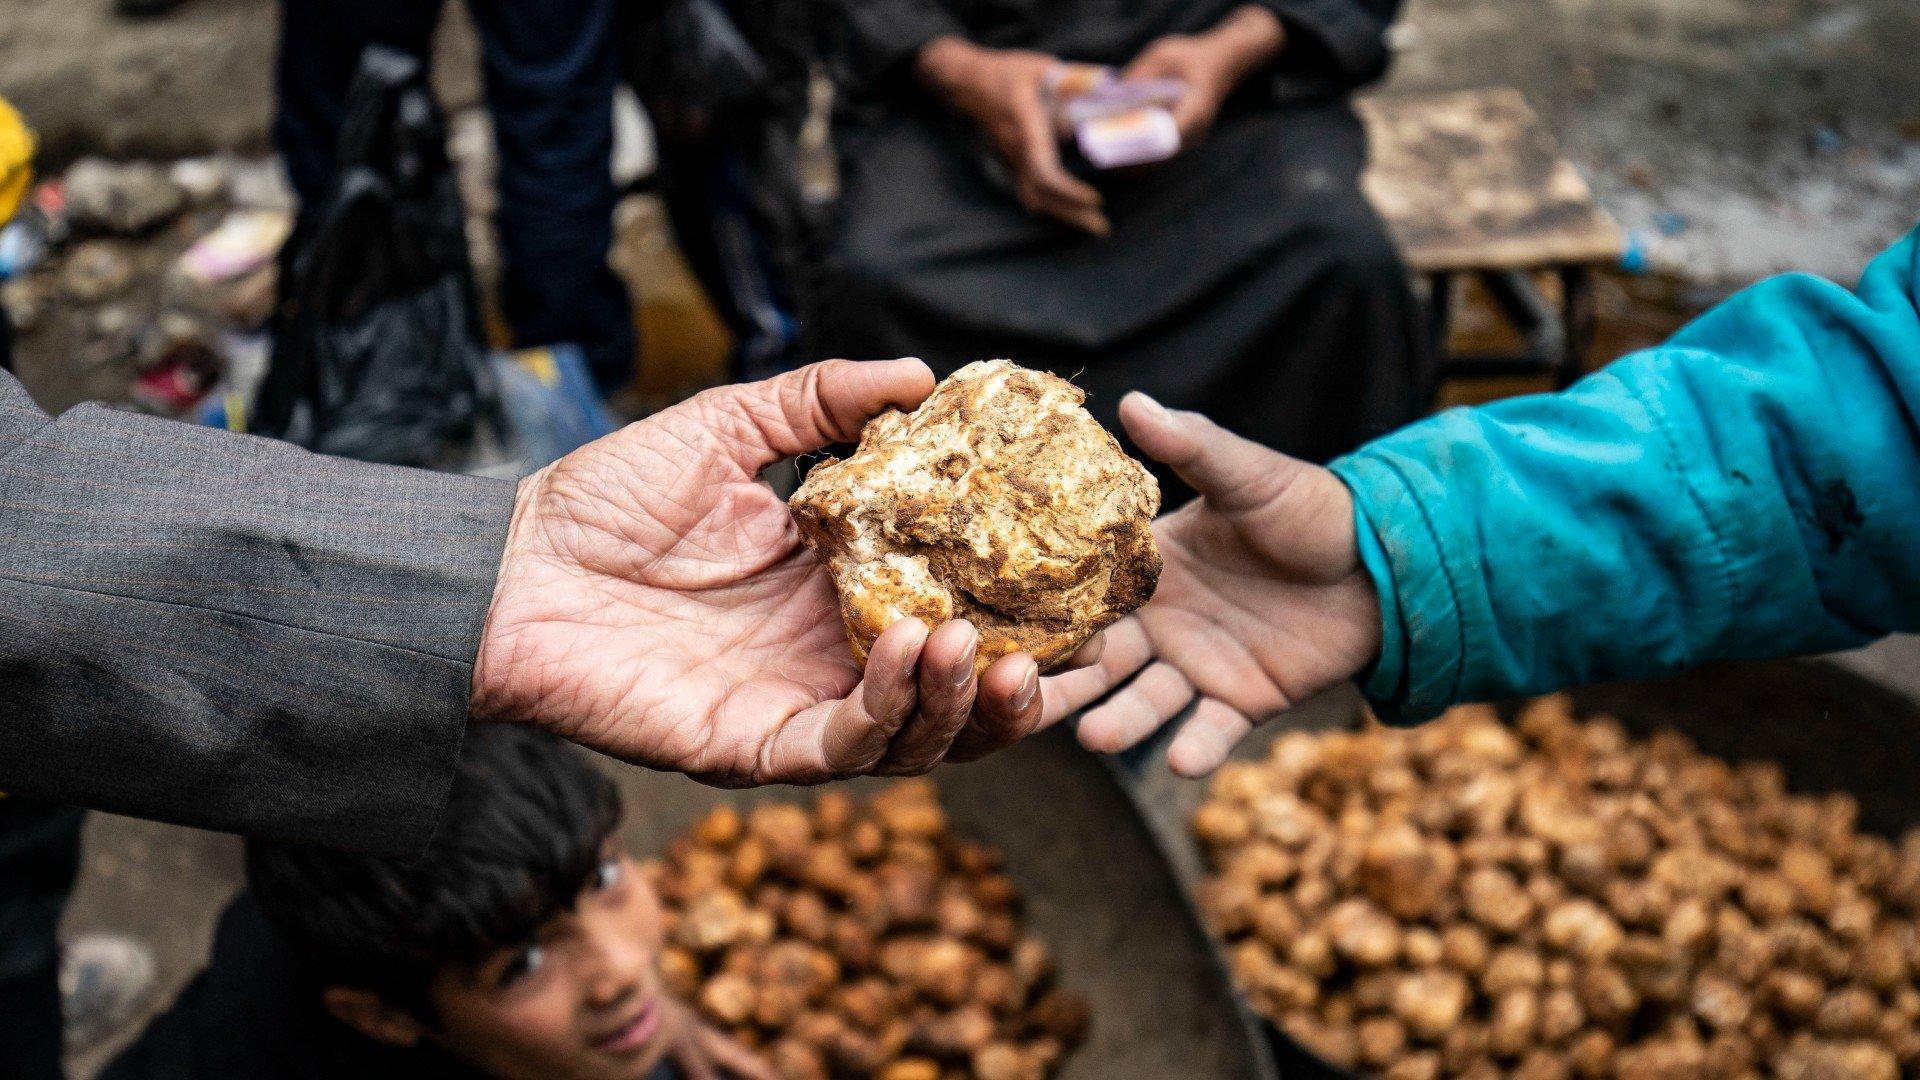 A customer buys a desert truffle from a merchant in a market in Syria's northeastern city of Raqqa on 14 March (AFP)